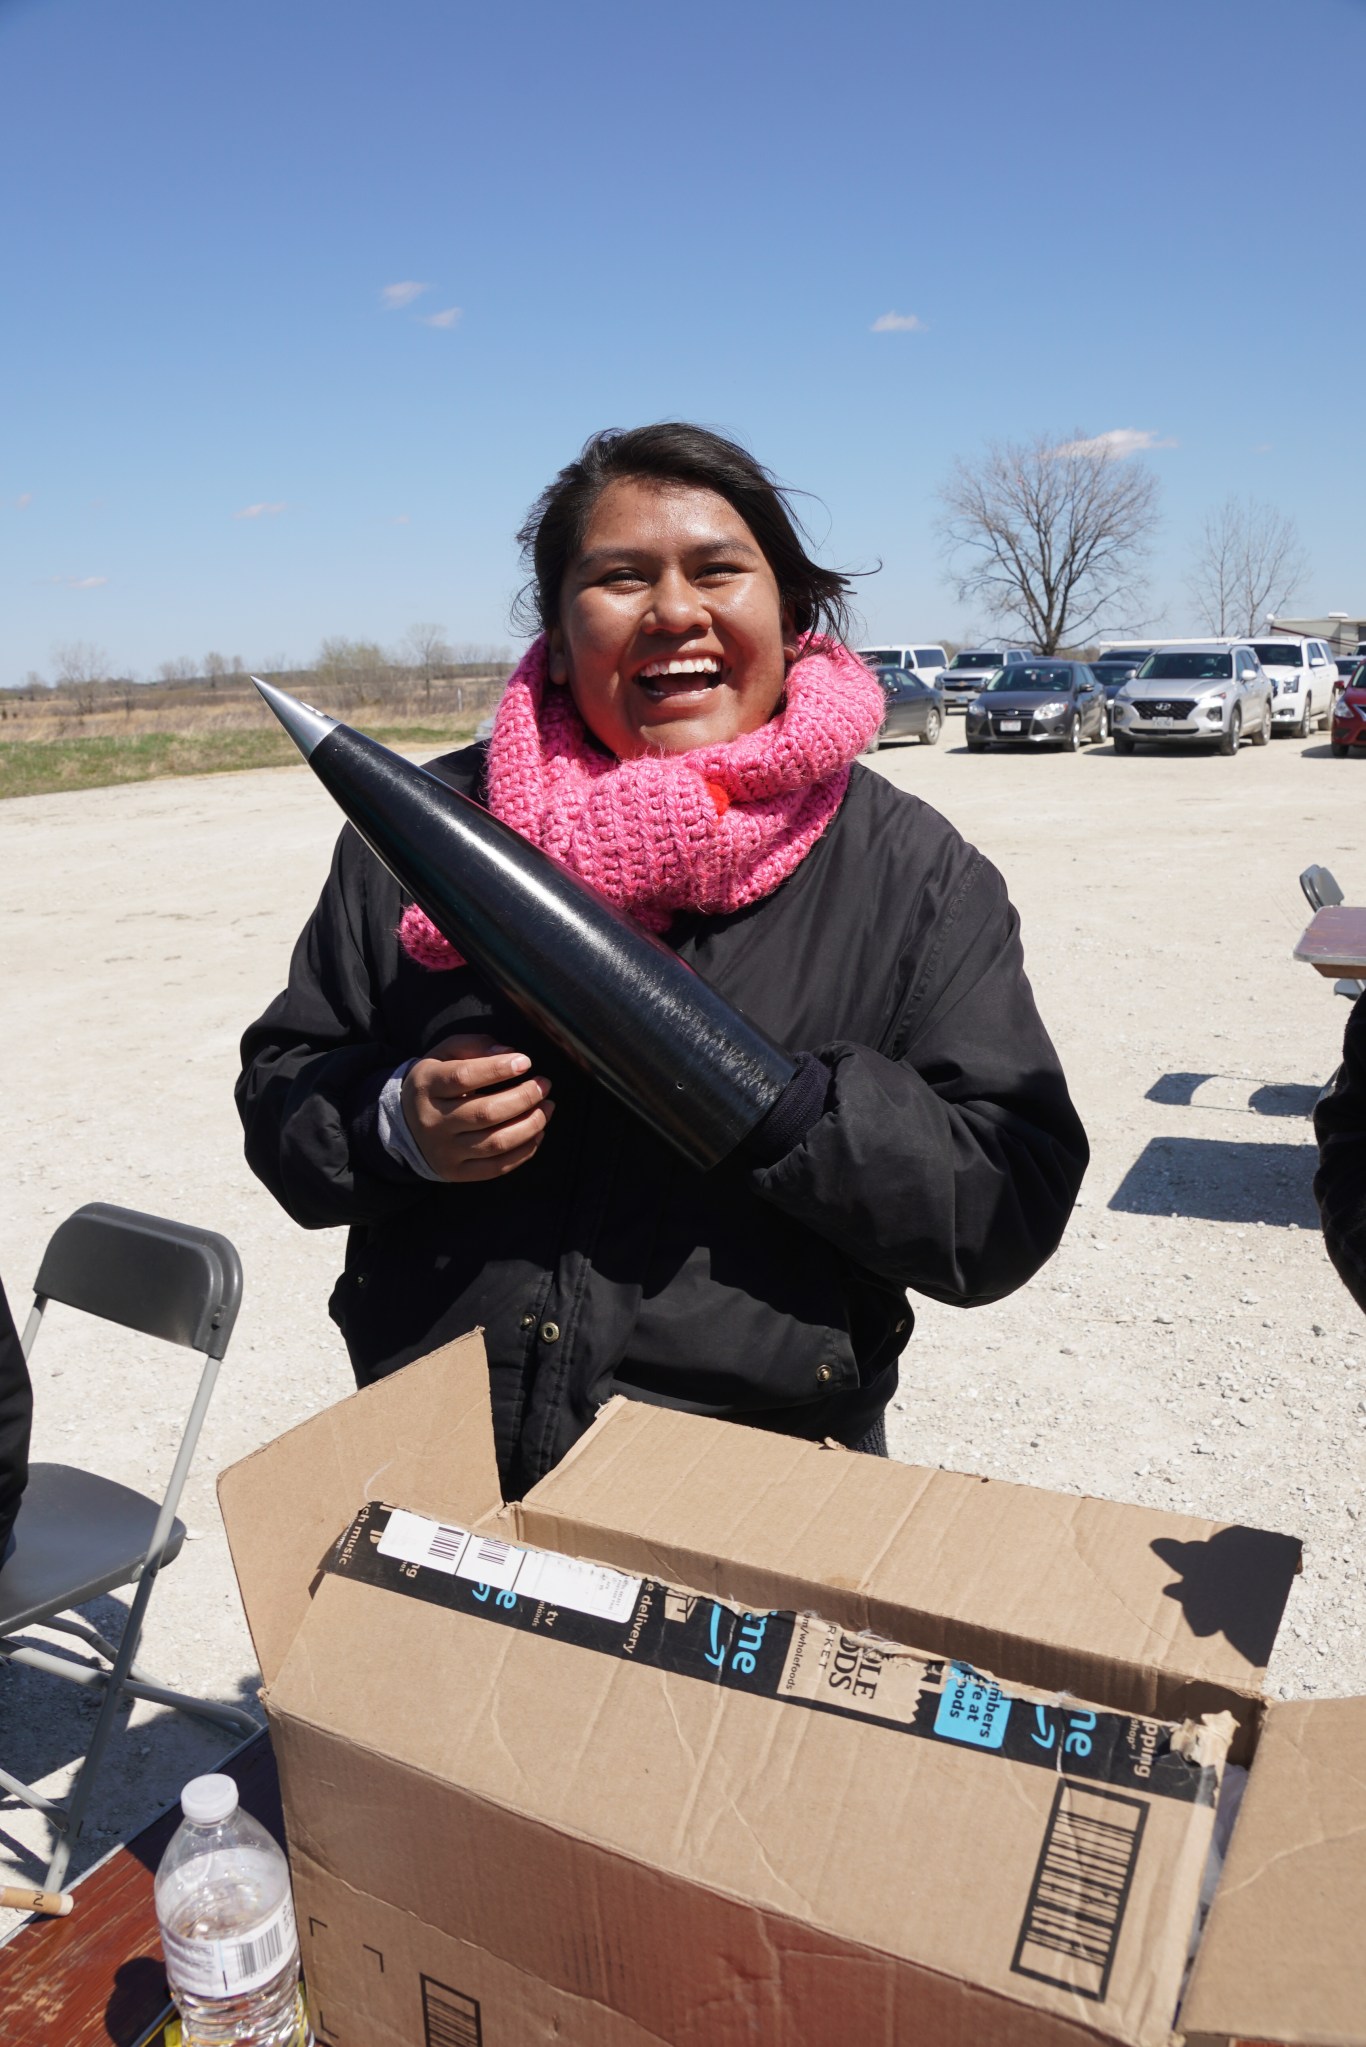 Skyhawks team lead Jodi James participates in the Wisconsin Space Grant Consortium's First Nations Launch competition in 2019.